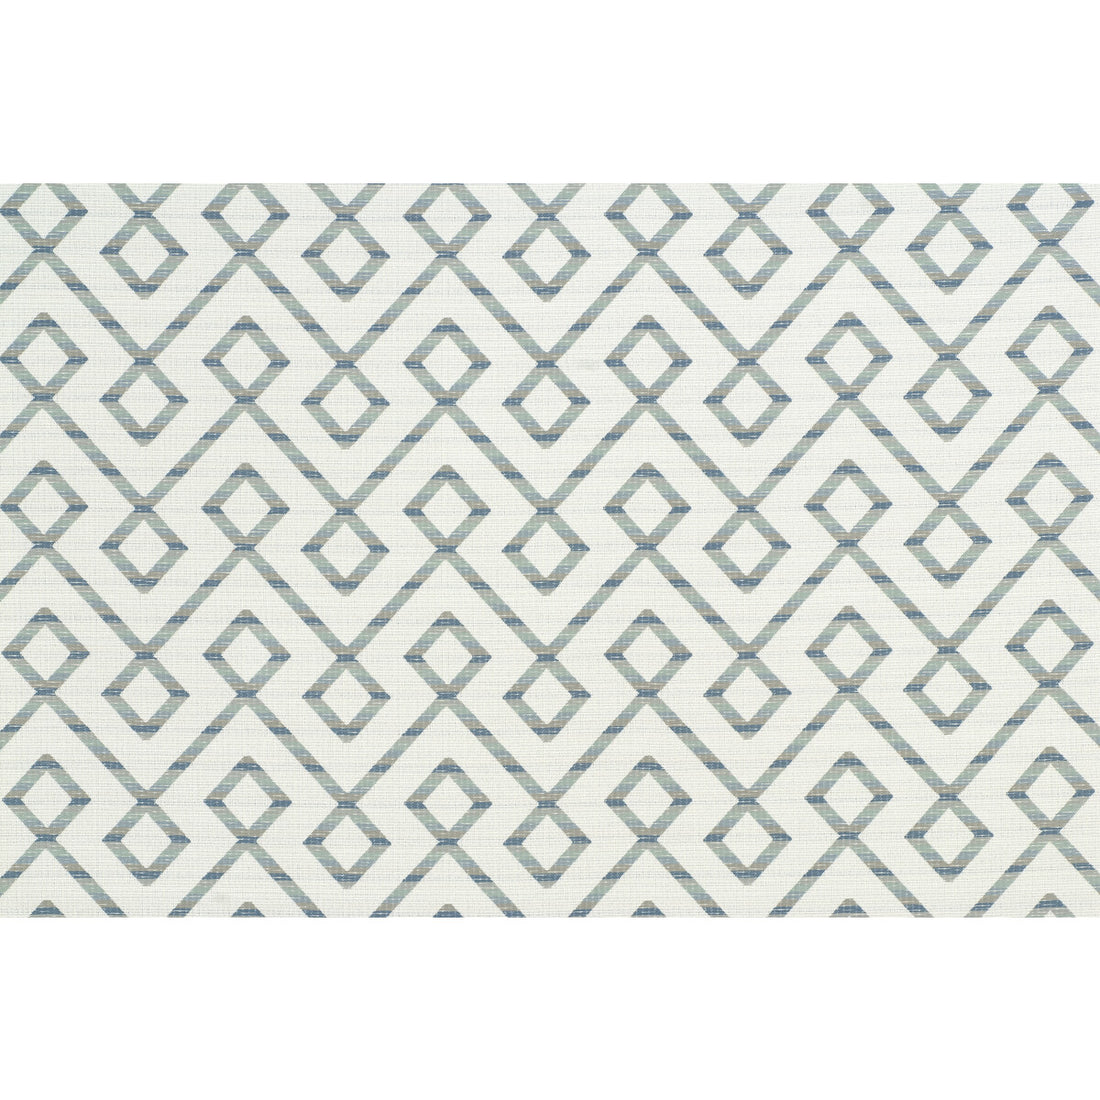 Kravet Contract fabric in 34758-15 color - pattern 34758.15.0 - by Kravet Contract in the Crypton Incase collection